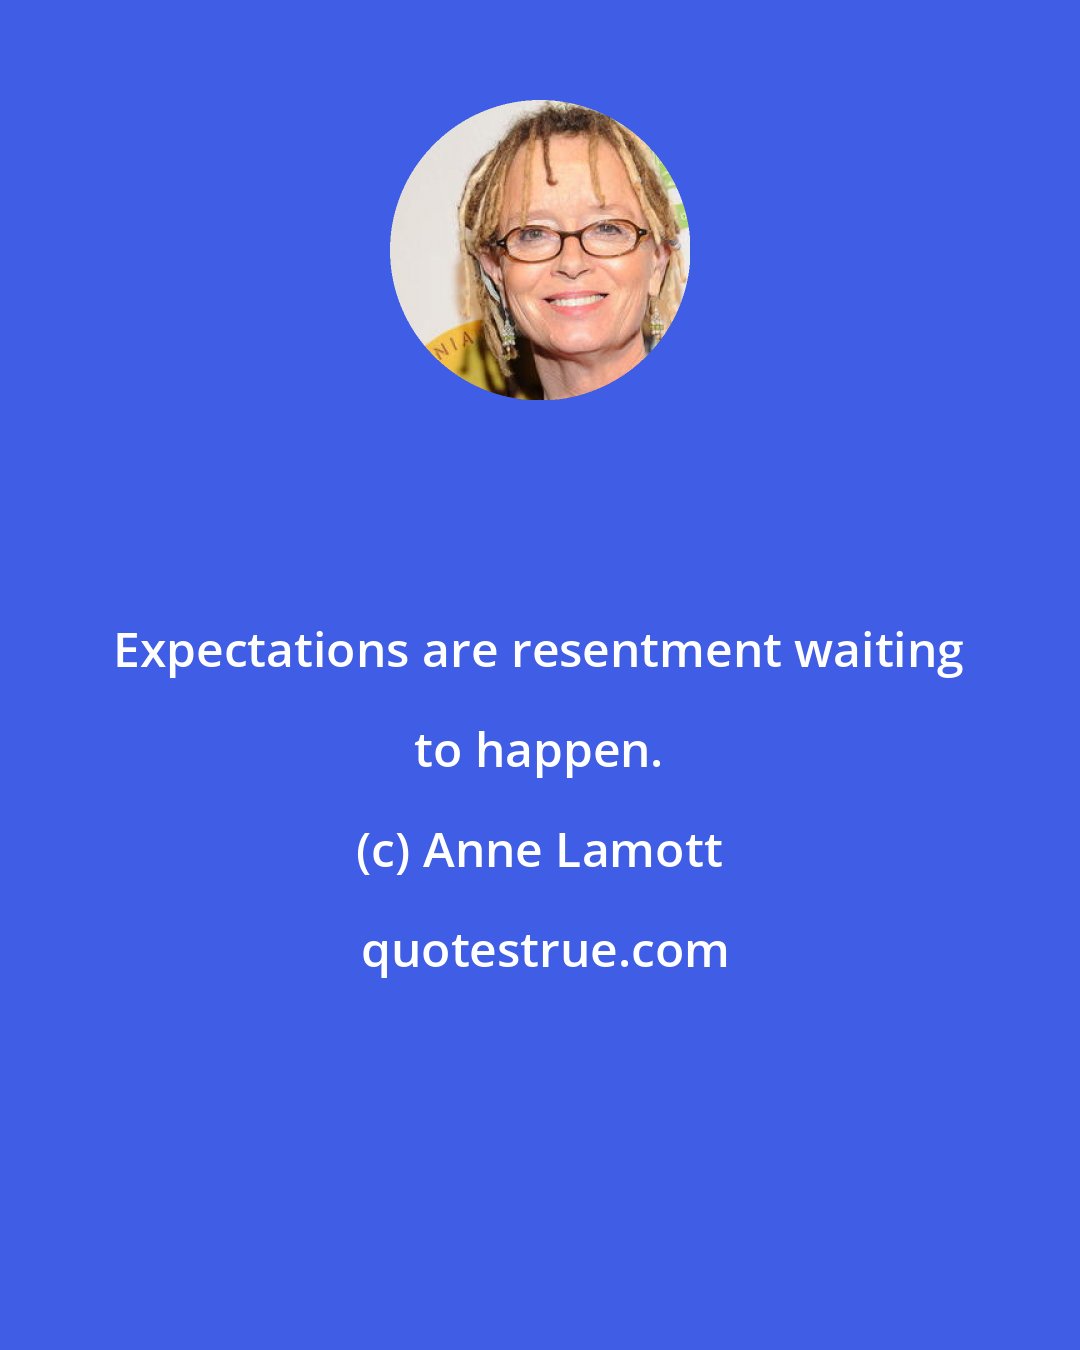 Anne Lamott: Expectations are resentment waiting to happen.